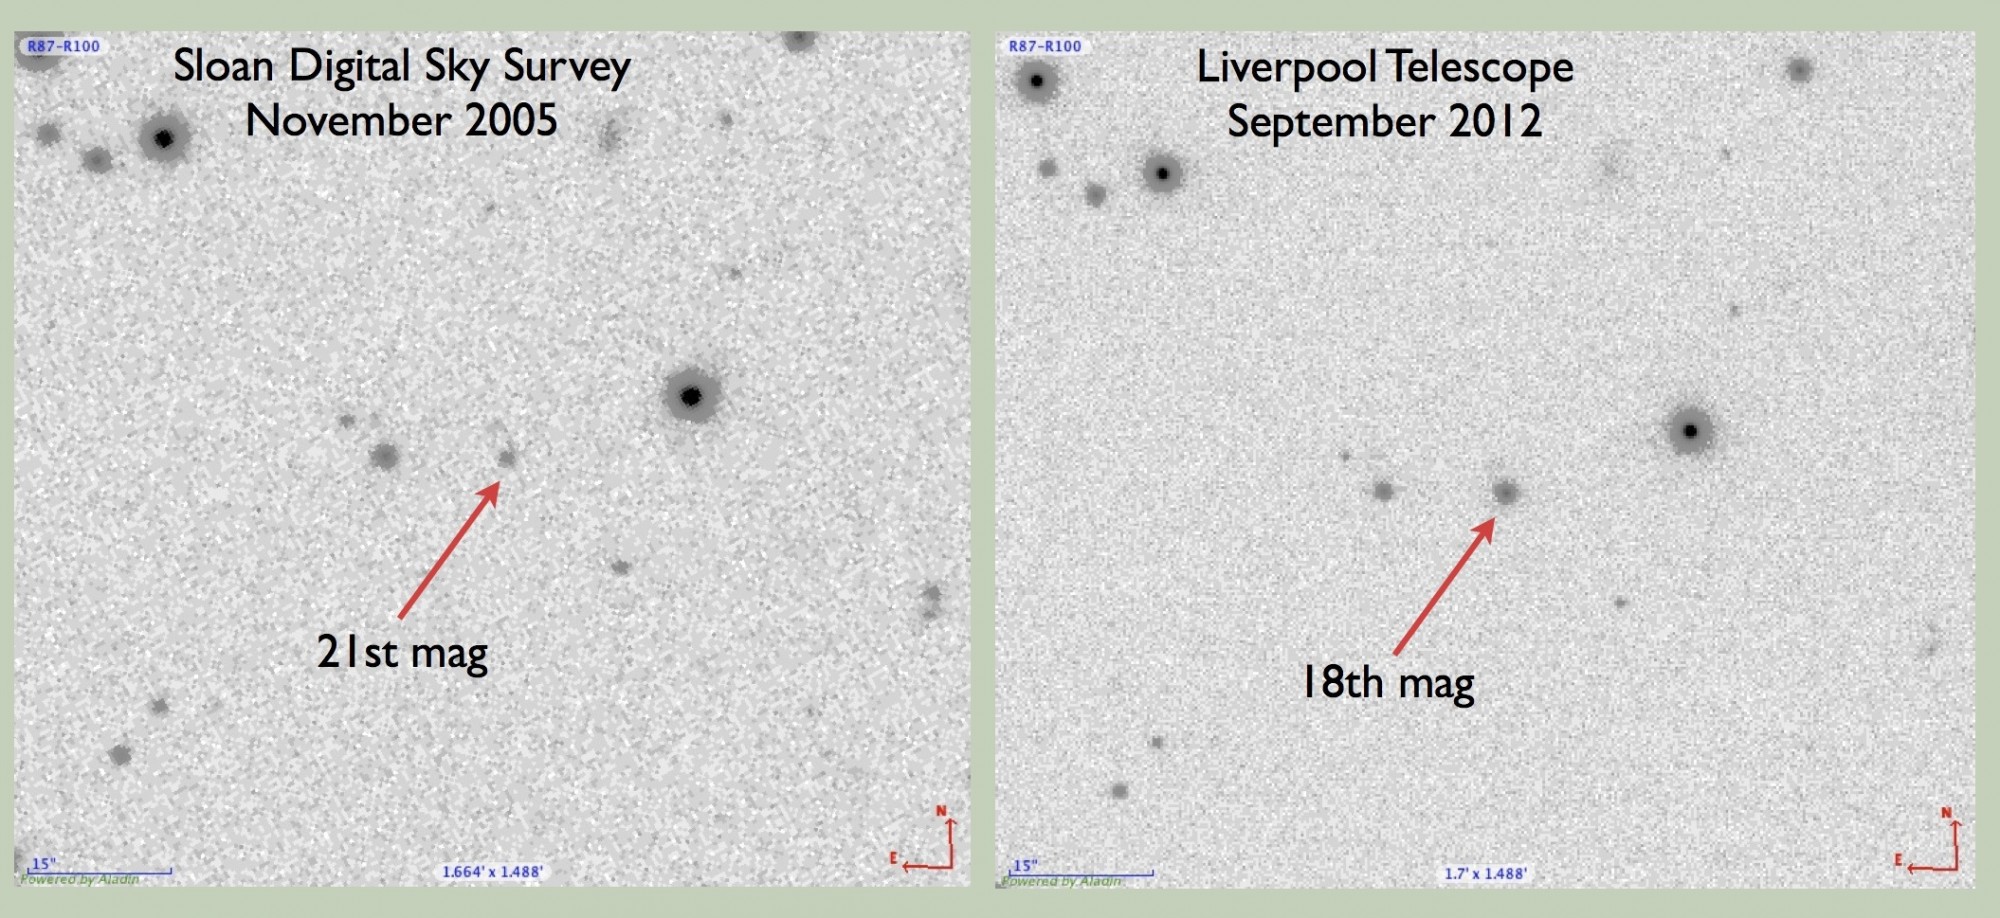 Image: A.Lawrence and the Liverpool Telescope